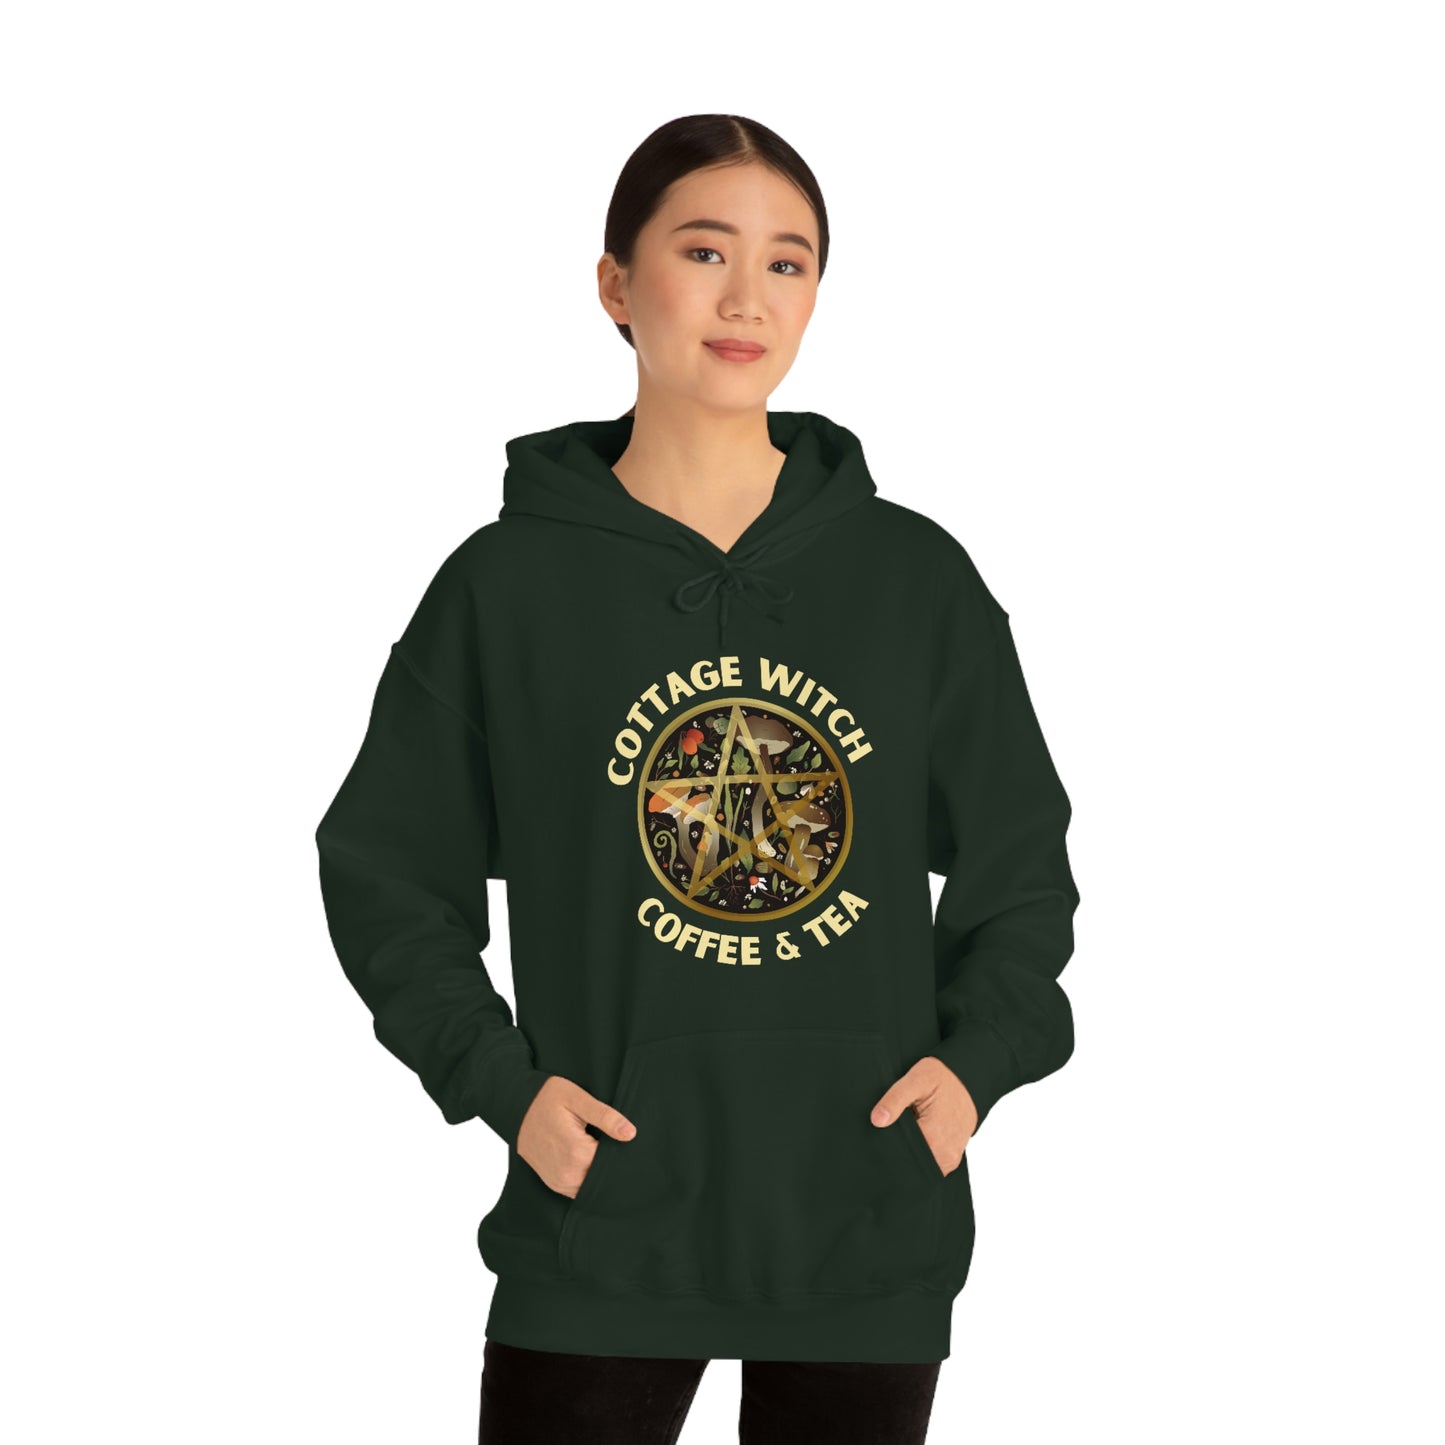 Cottage Witch Coffee and Tea - Unisex Heavy Blend Hooded Sweatshirt